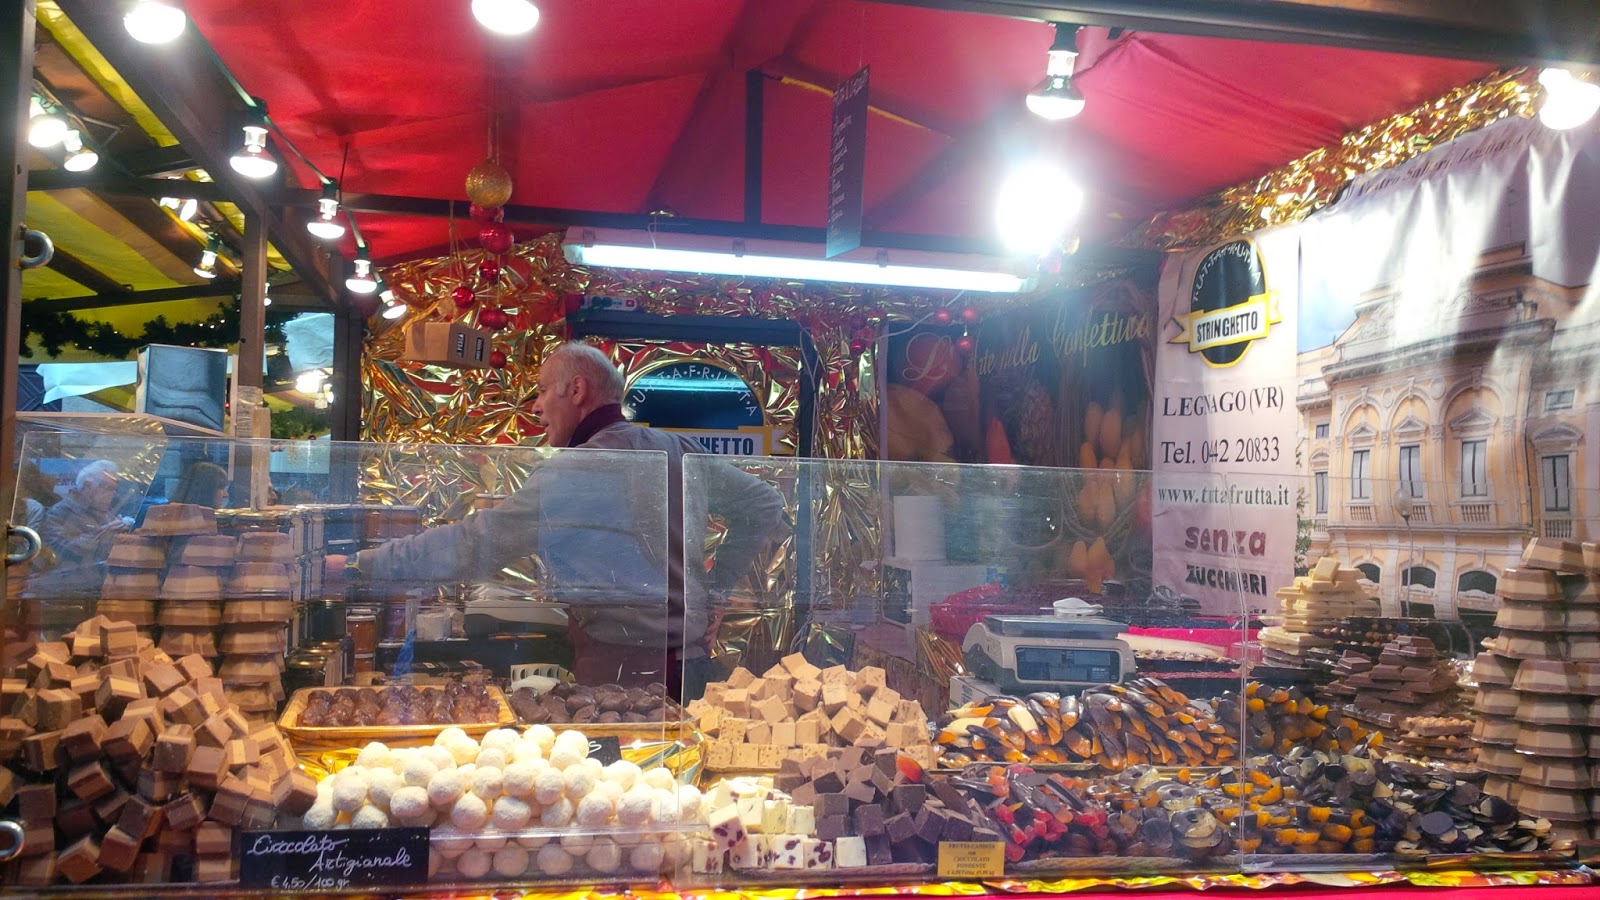 A chocolate stall at the Christmas market in Verona